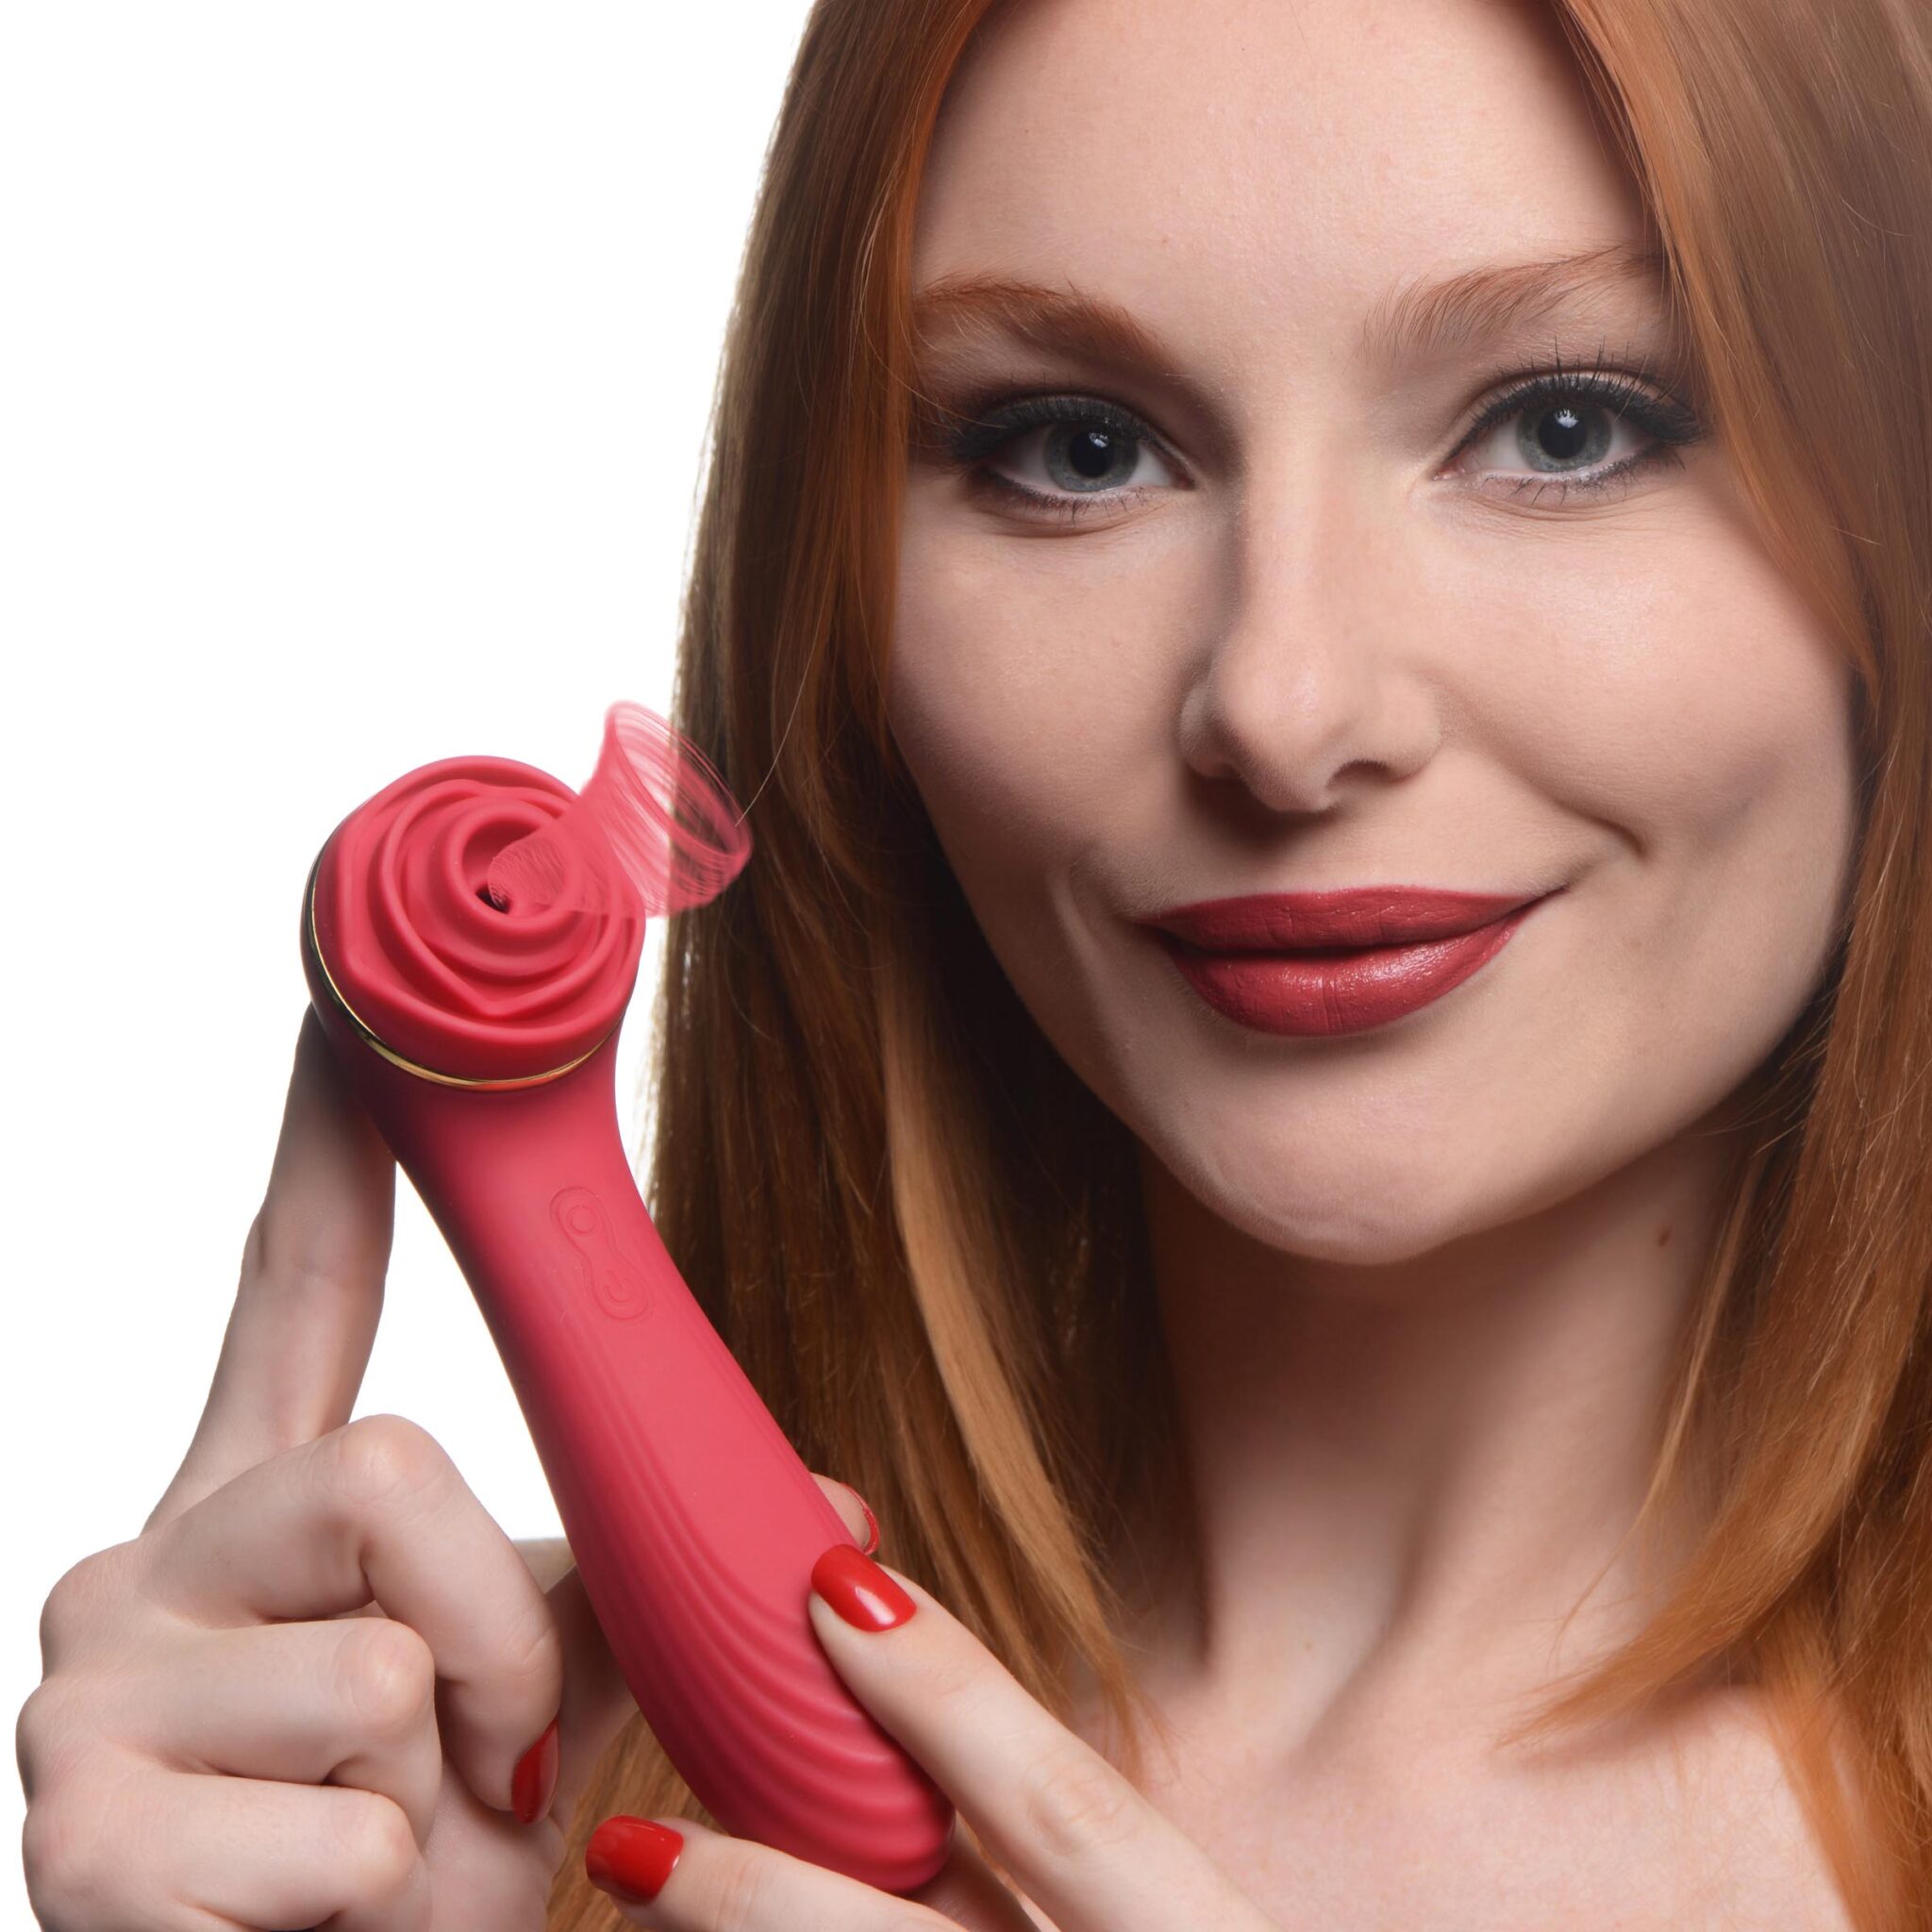 Passion Petals 10X Silicone Suction Rose Vibrator – Red